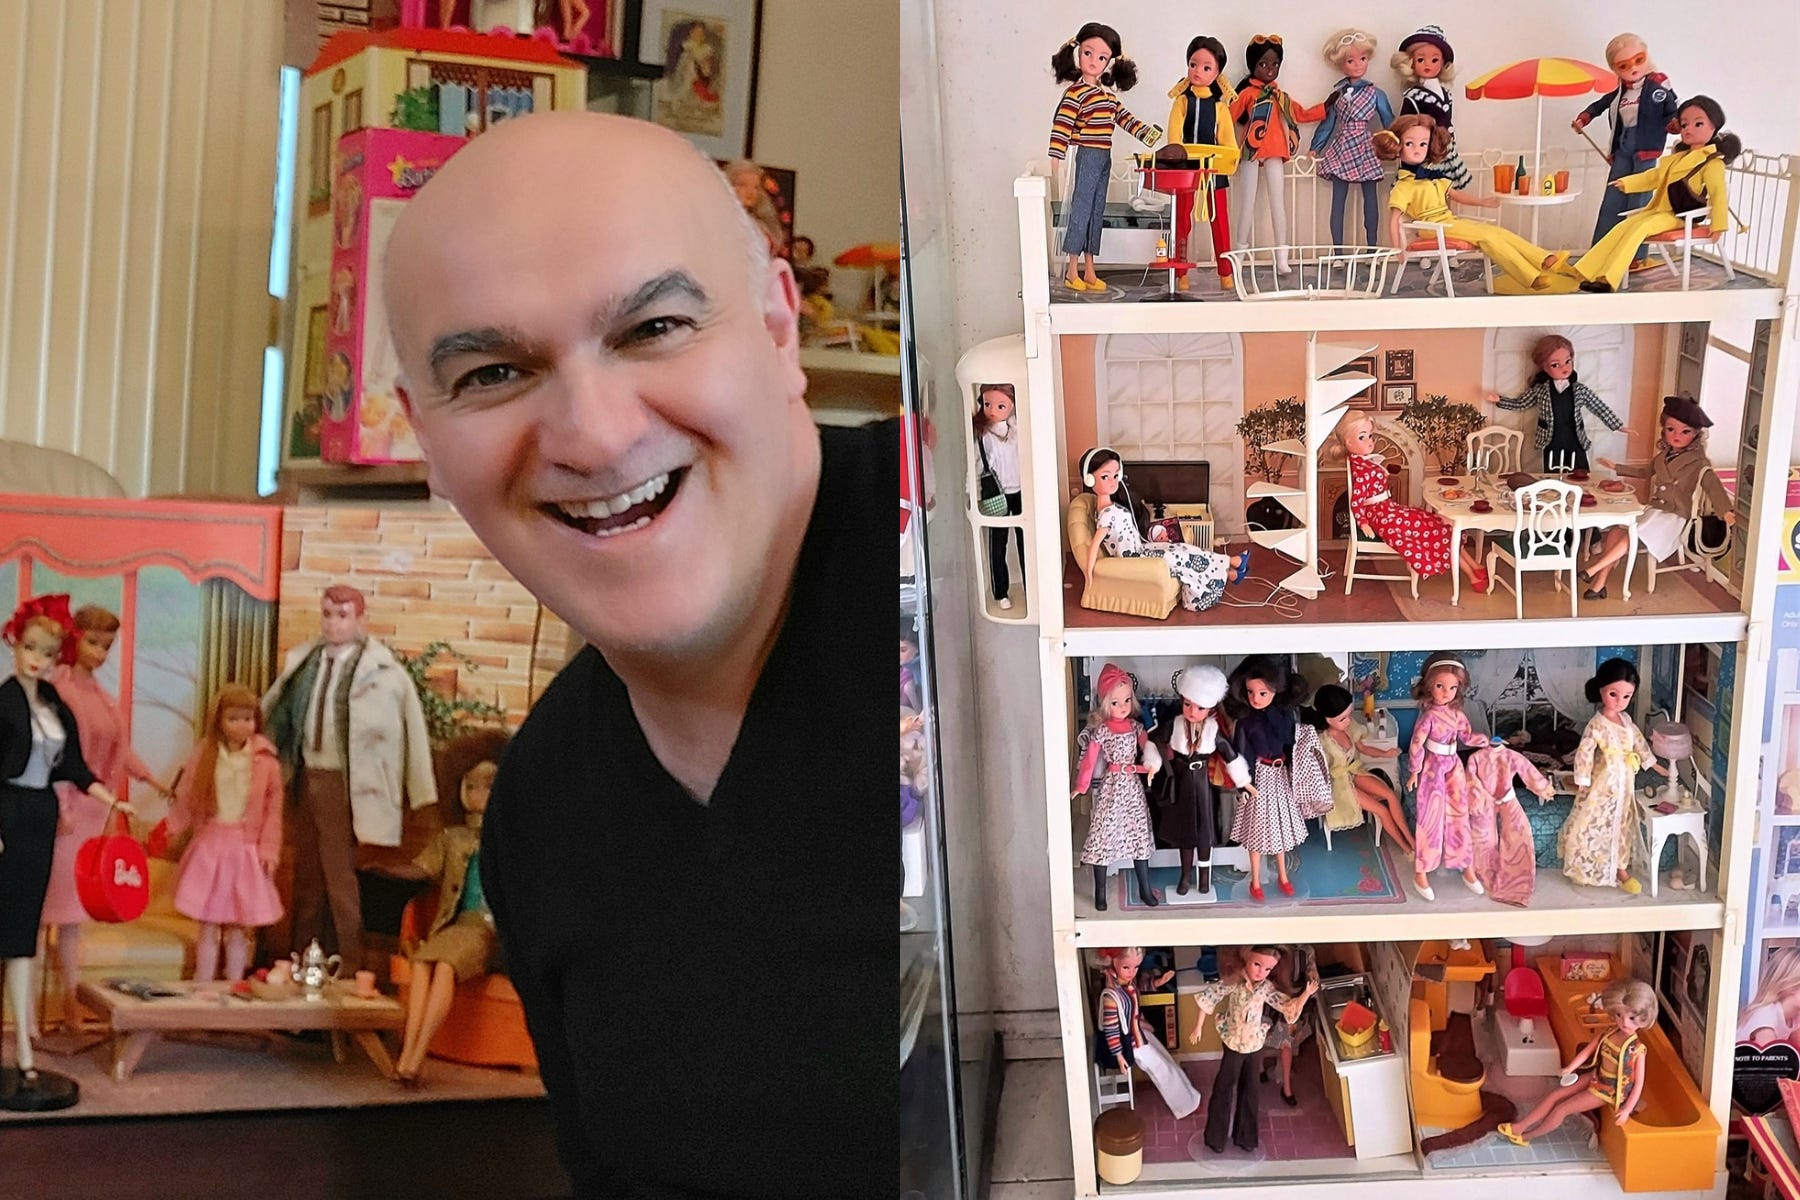 Eddi Franz’s guests love his collection (PA Real Life/Collect)